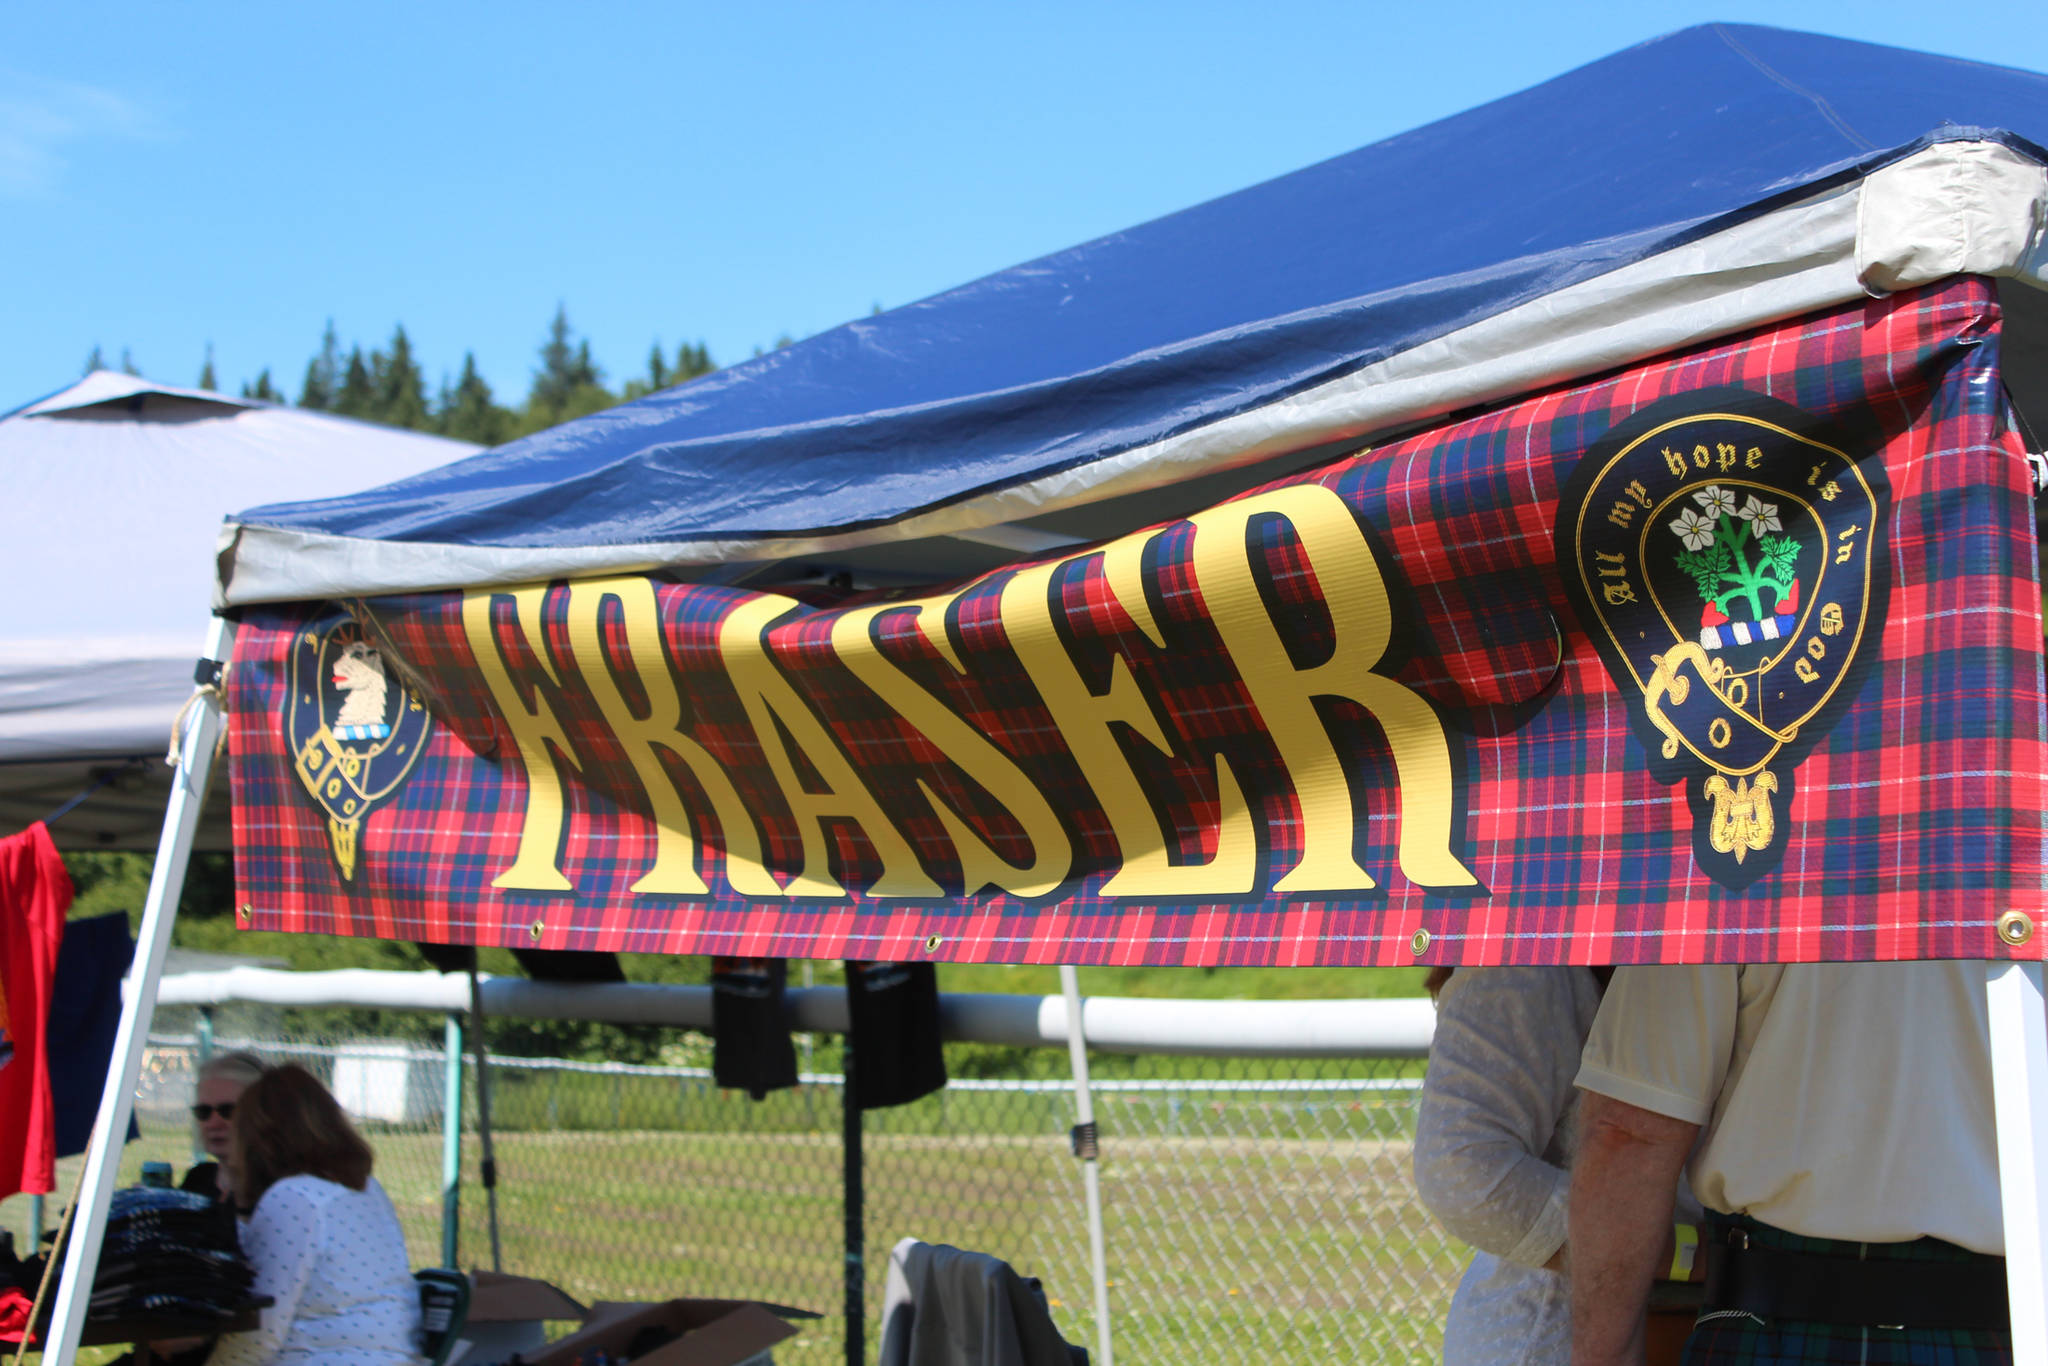 A clan booth advertises the Fraser clan at this year’s Kachemak Bay Scottish Highland Games on Saturday, July 7, 2018 at Karen Hornaday Park in Homer, Alaska. (Photo by Megan Pacer/Homer News)